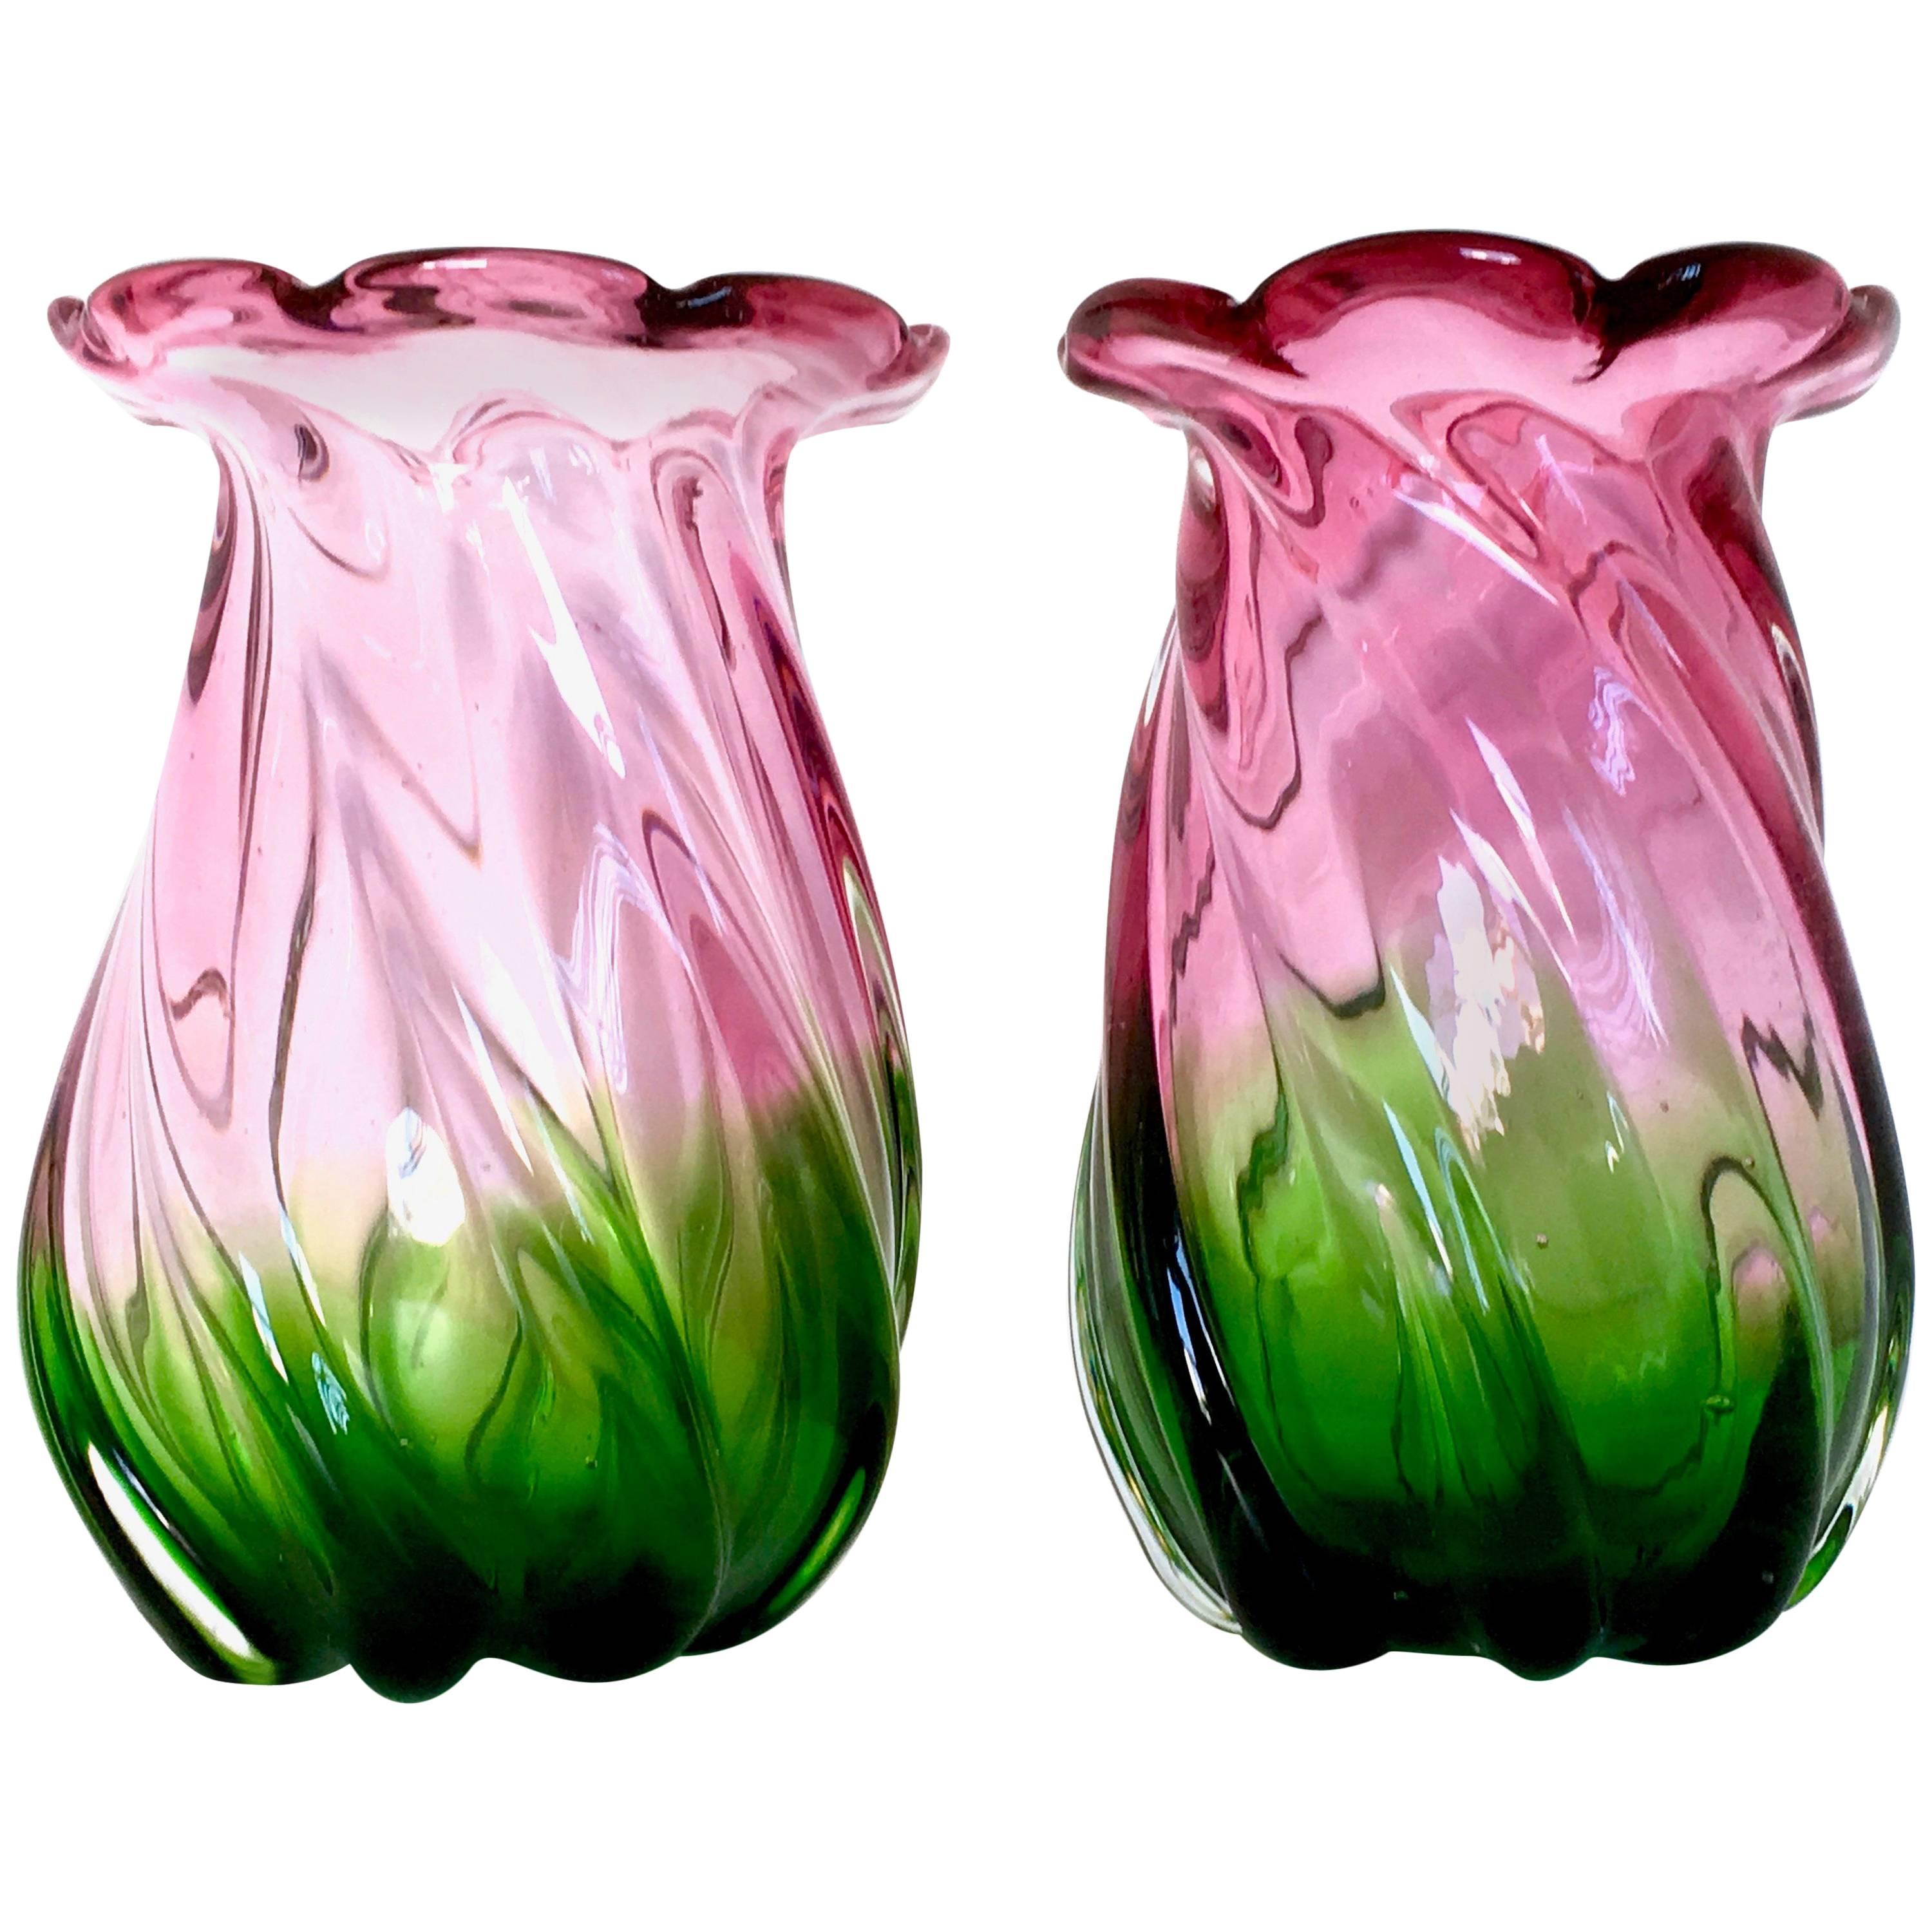 Pair of Murano Glass Vases Ascribable to Vetreria Toso, Italy, 1950s